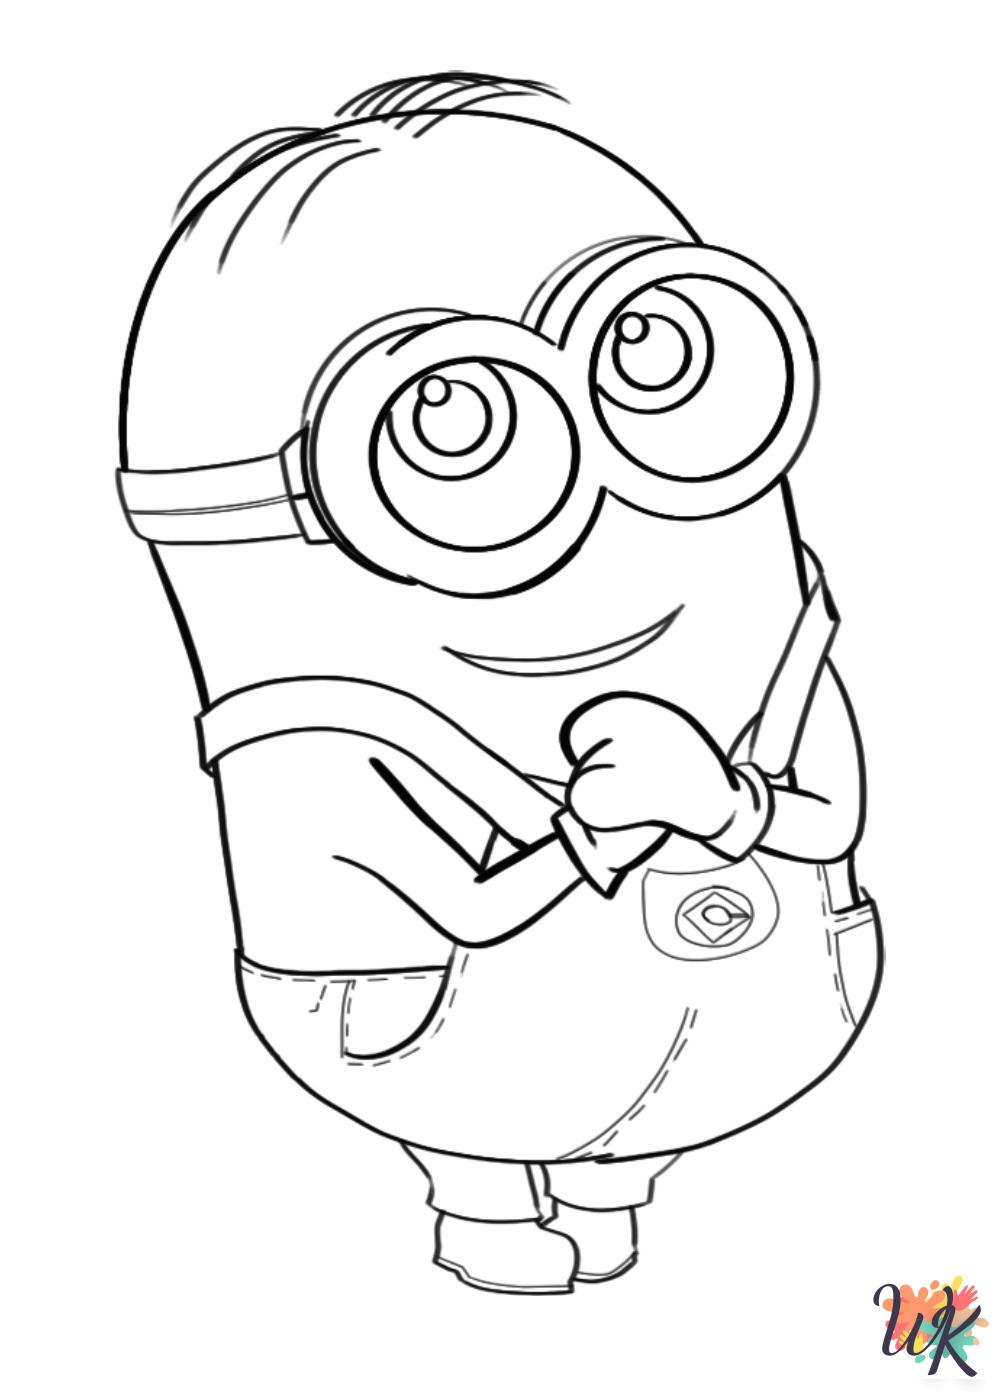 Minions coloring book pages